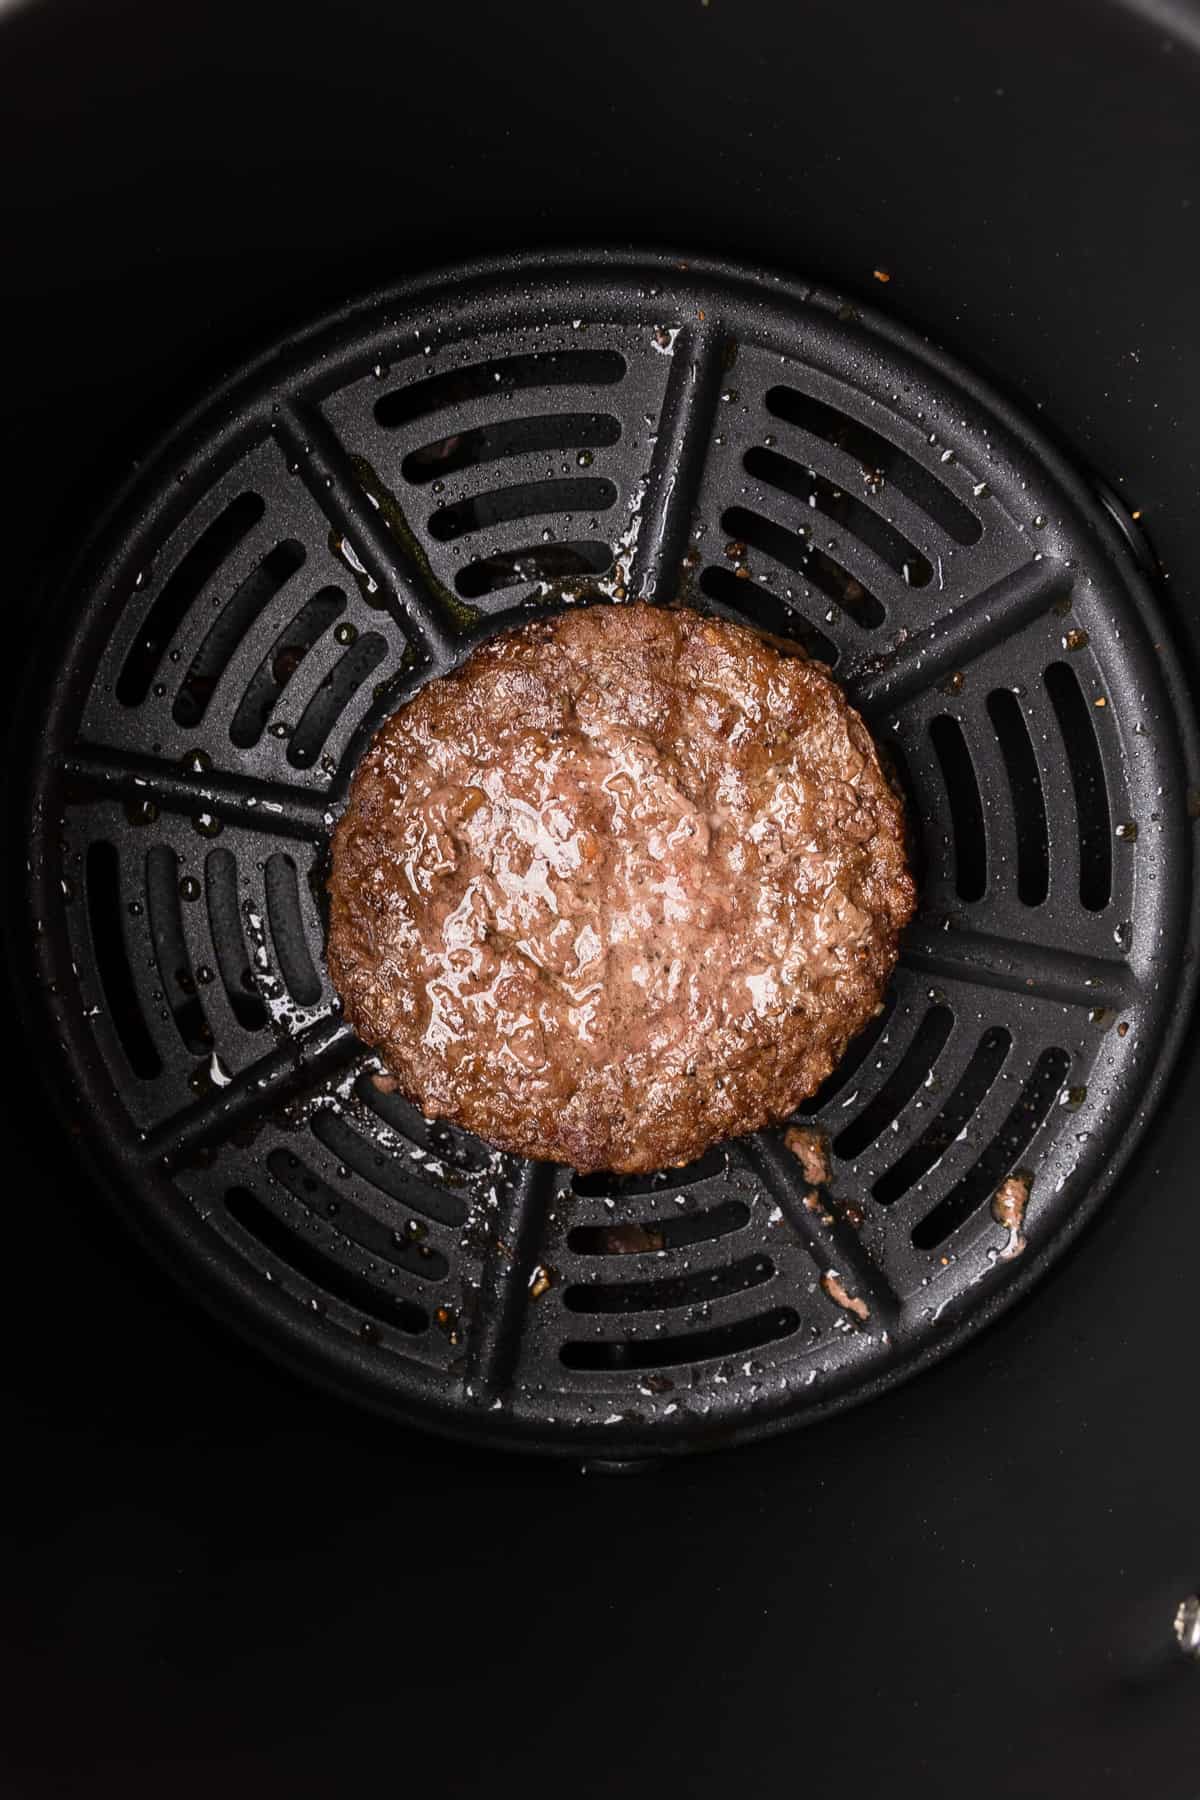 the cooked burger patty in the air fryer